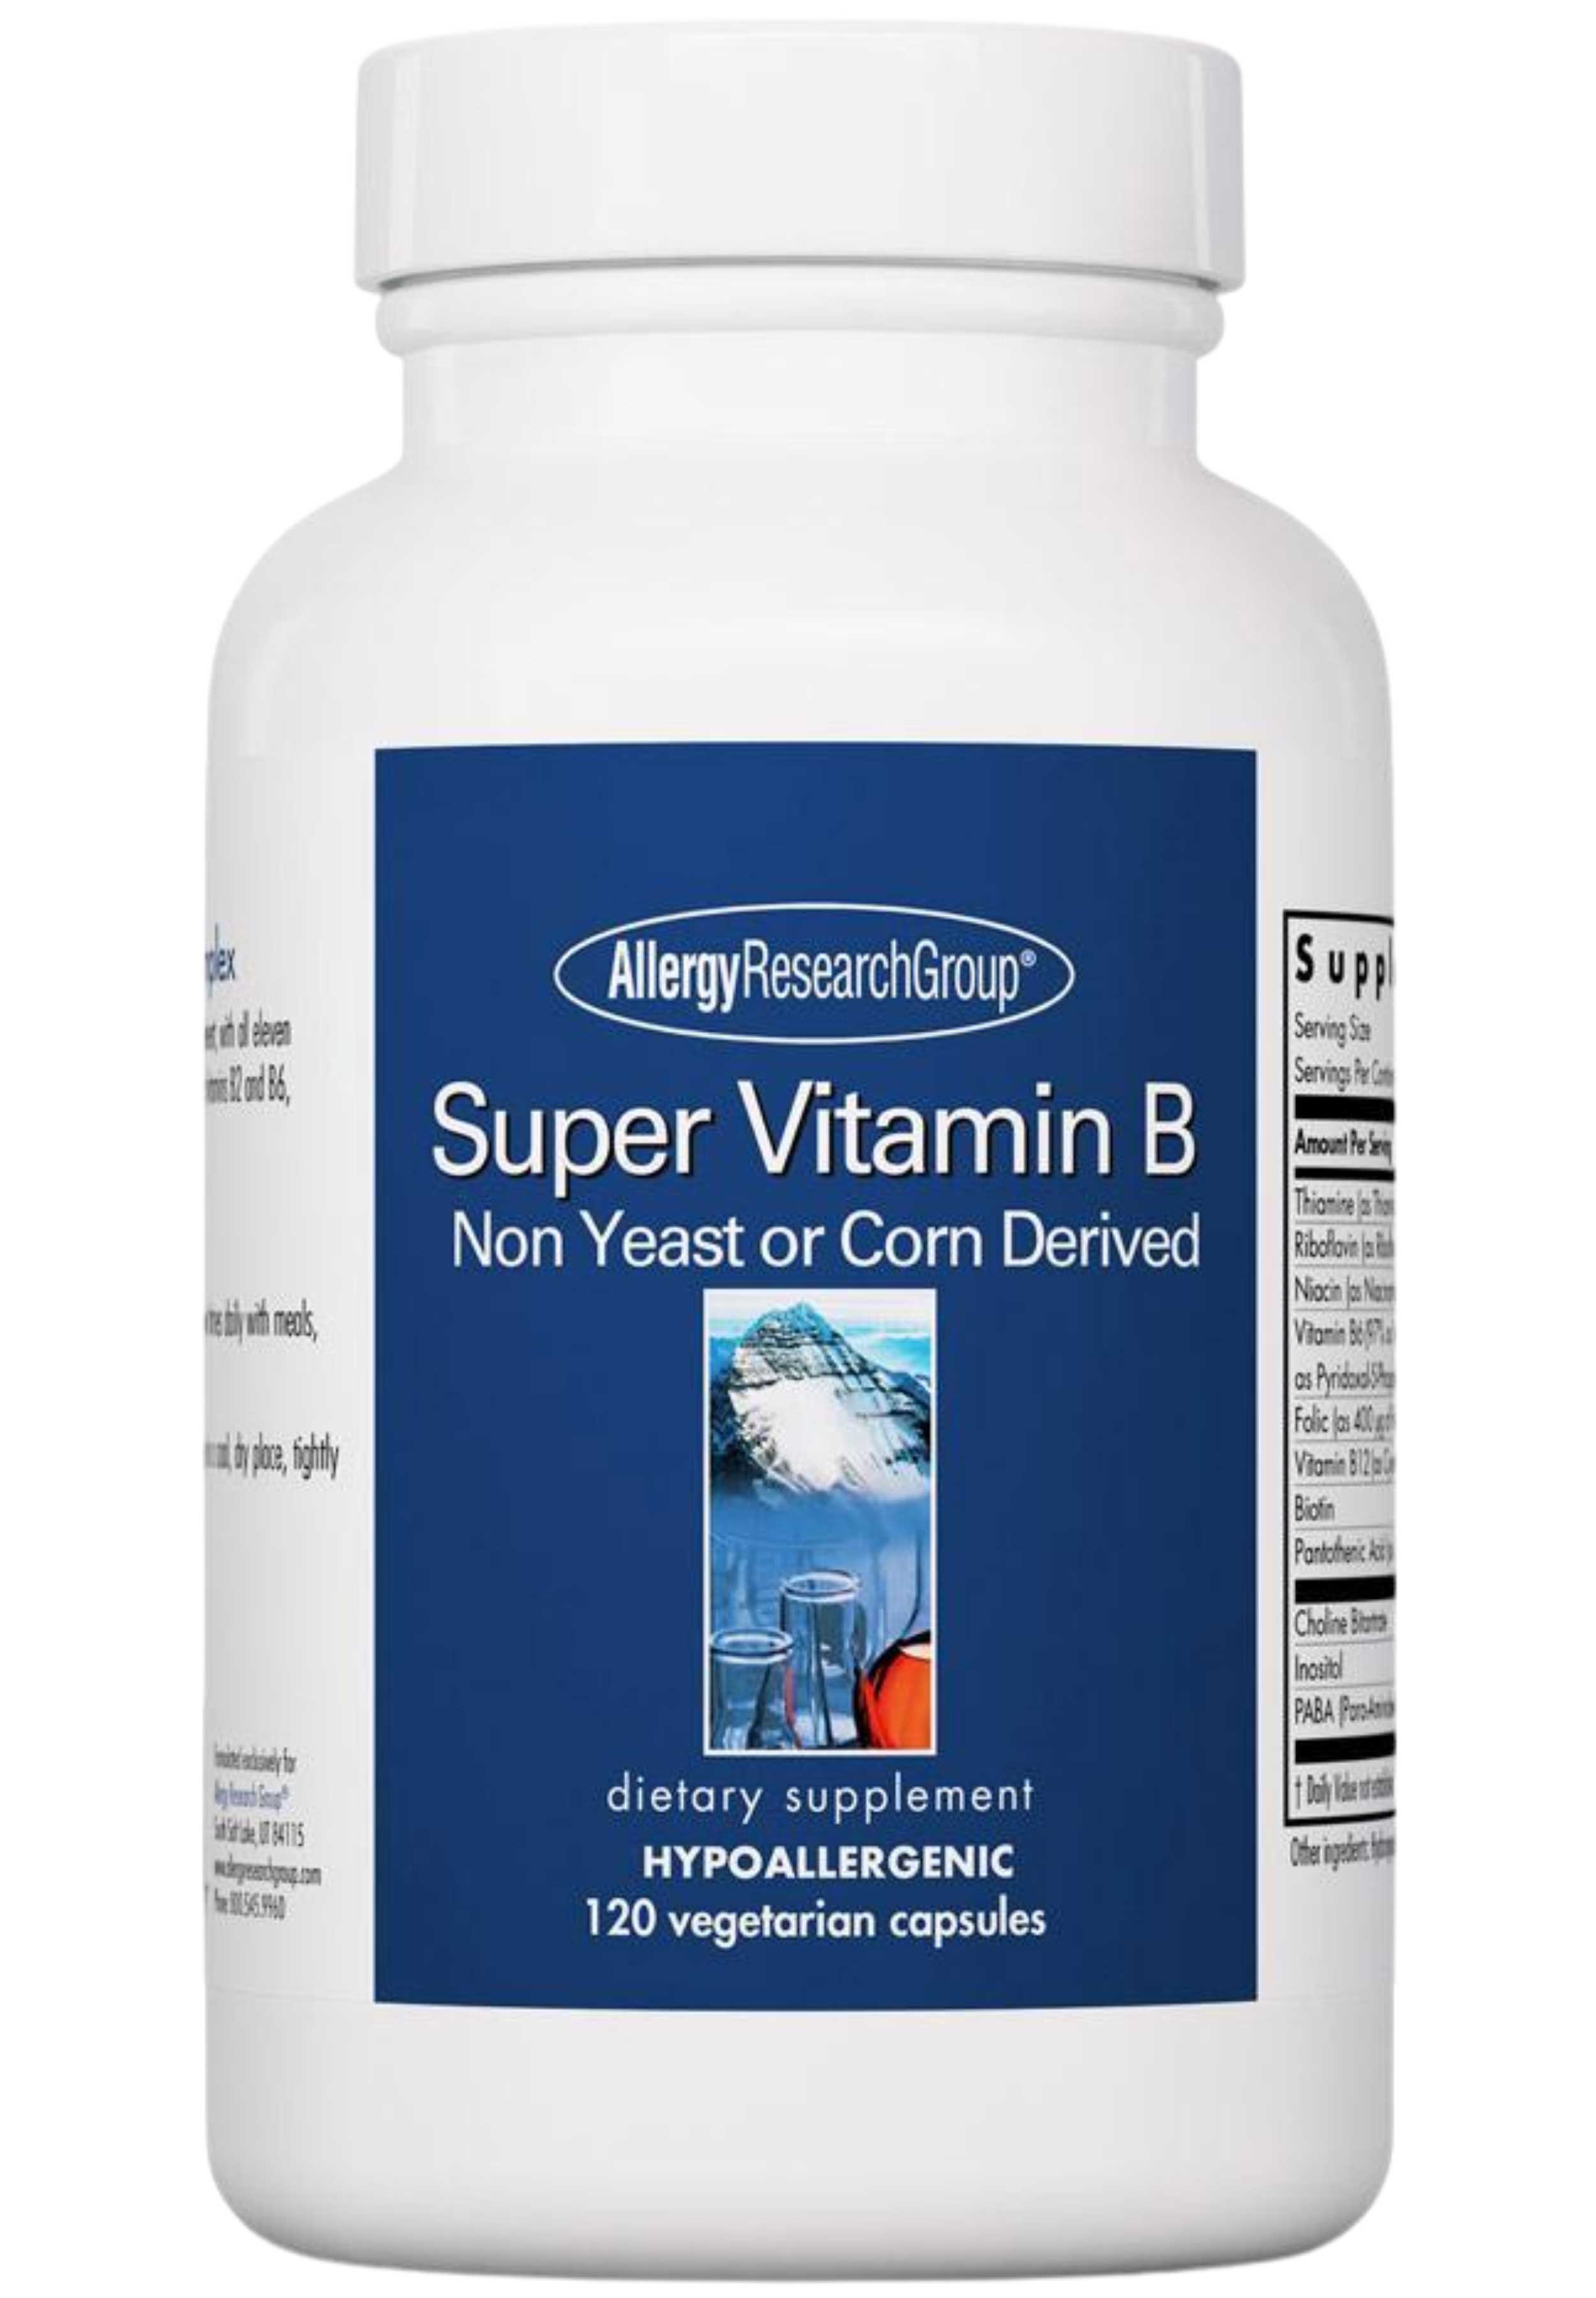 Allergy Research Group Super Vitamin B